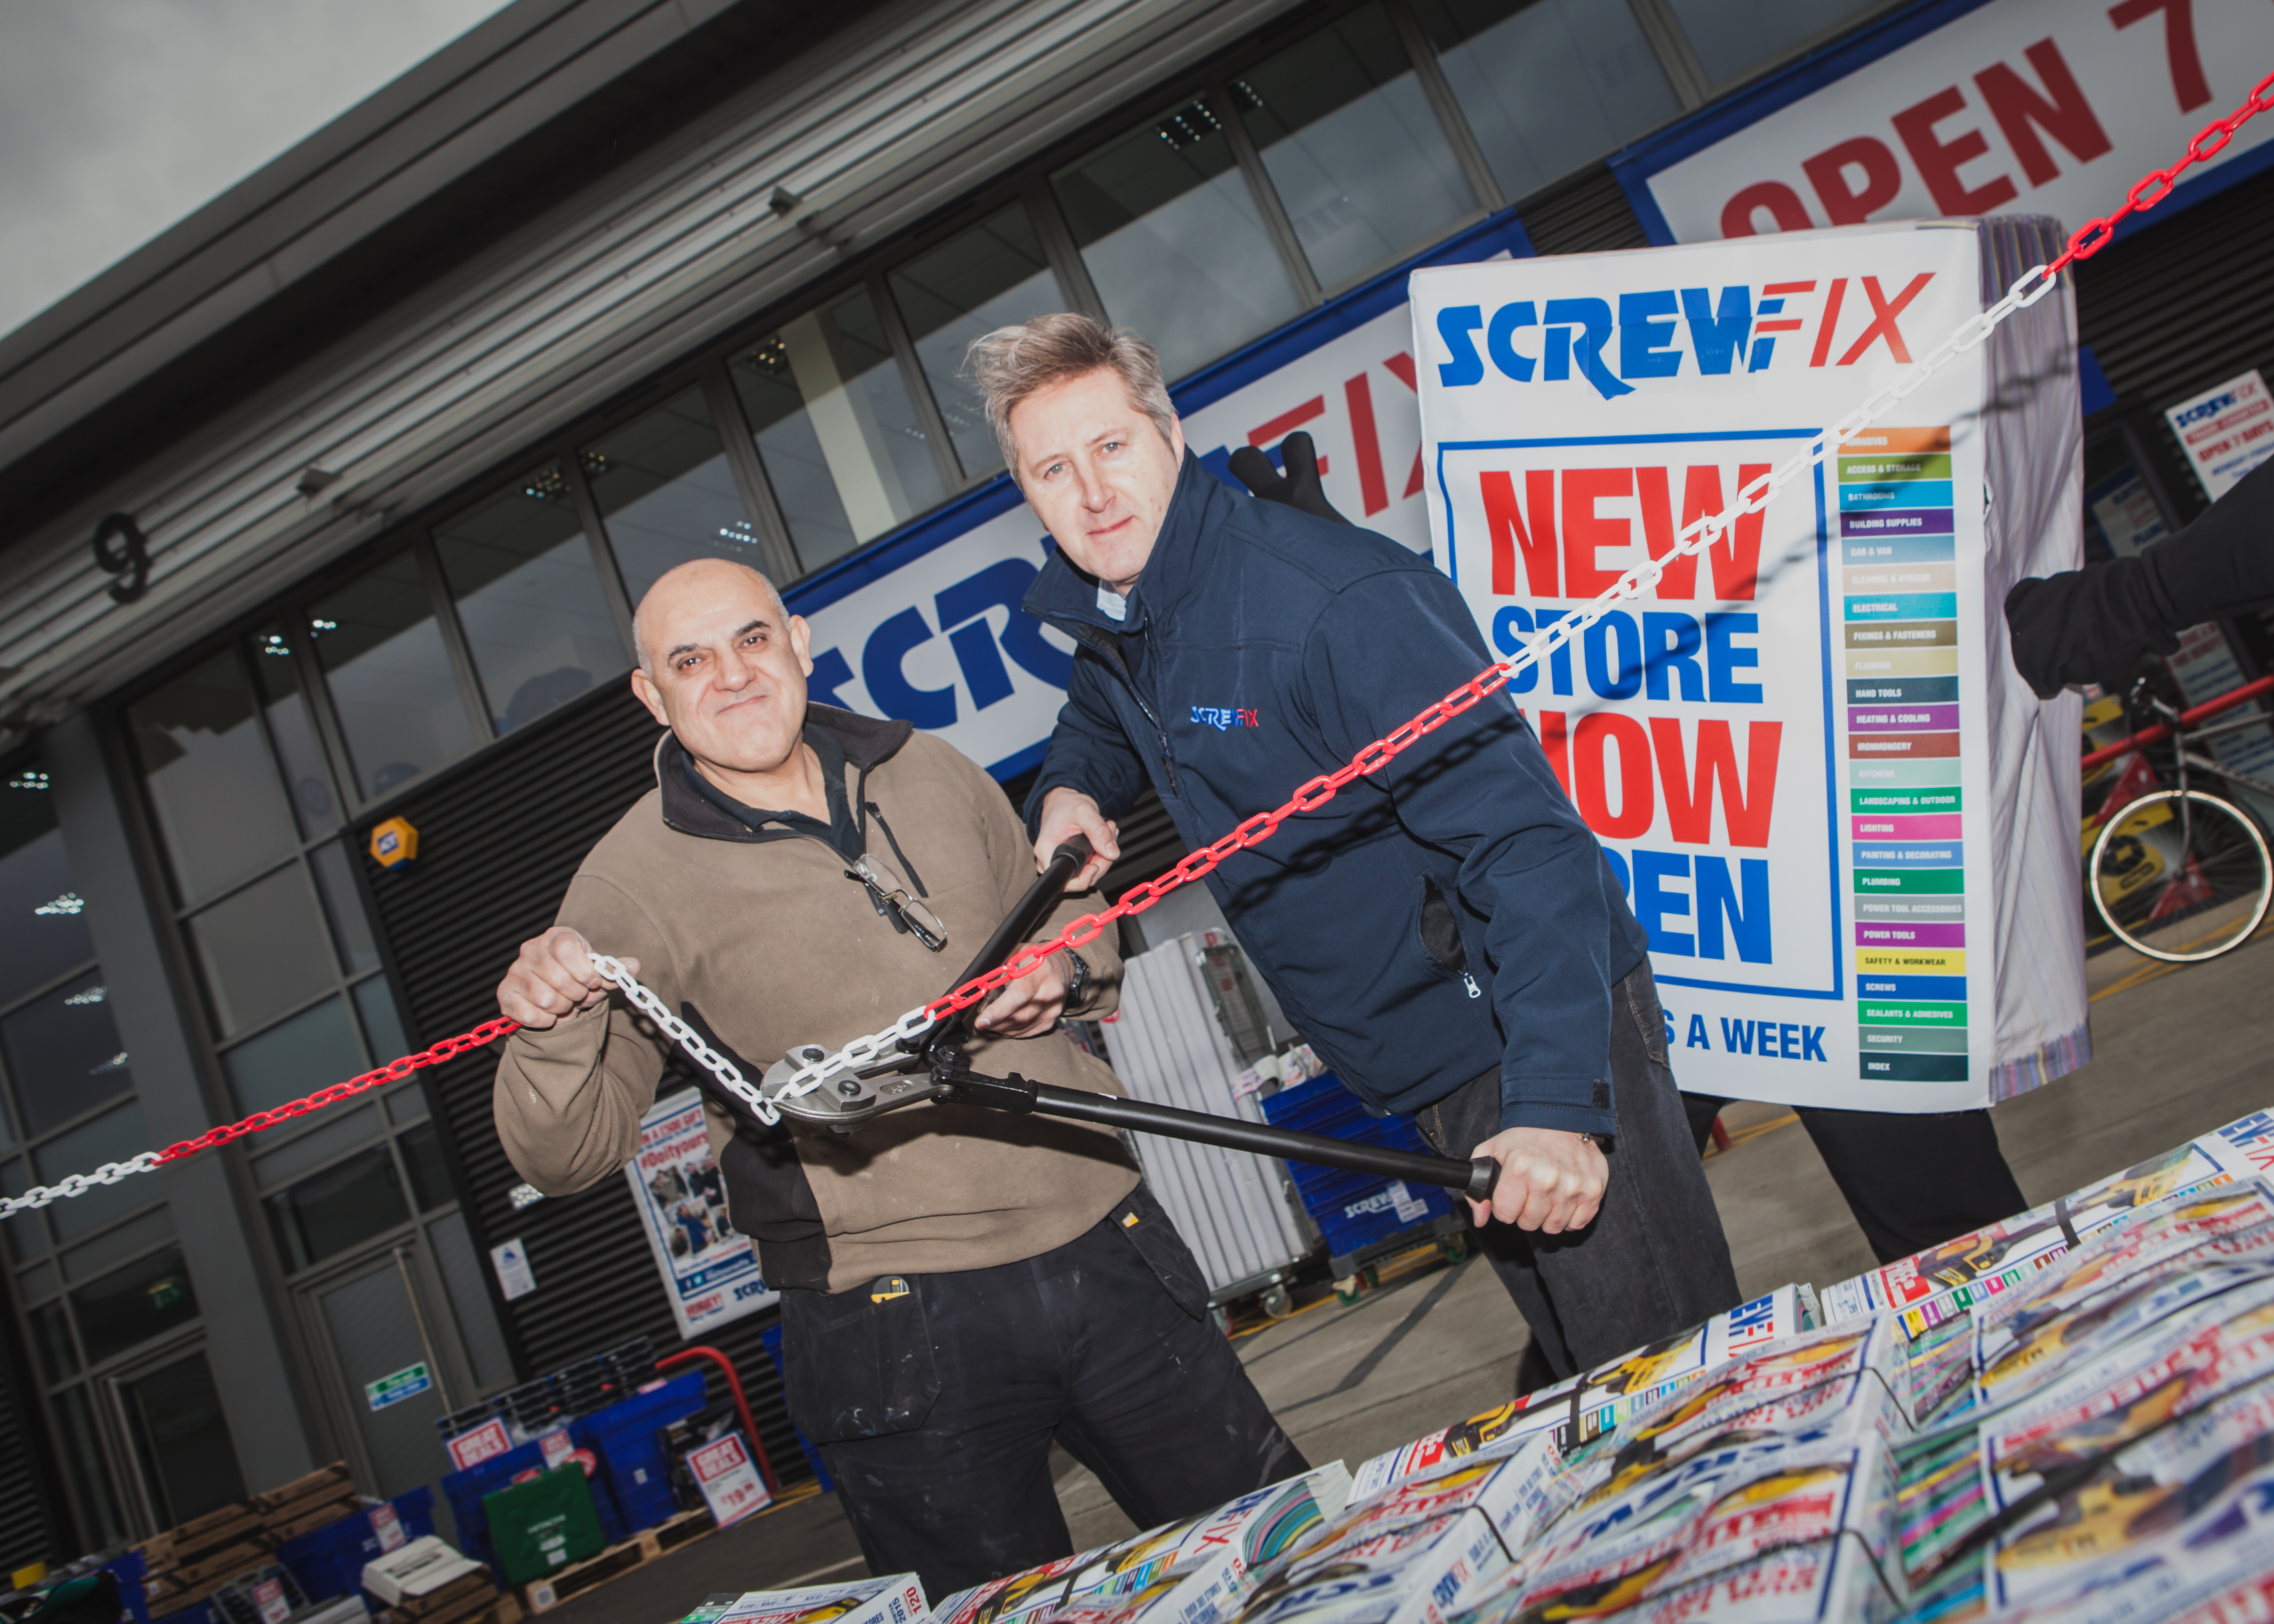 Isleworth’s first Screwfix store is declared a runaway success